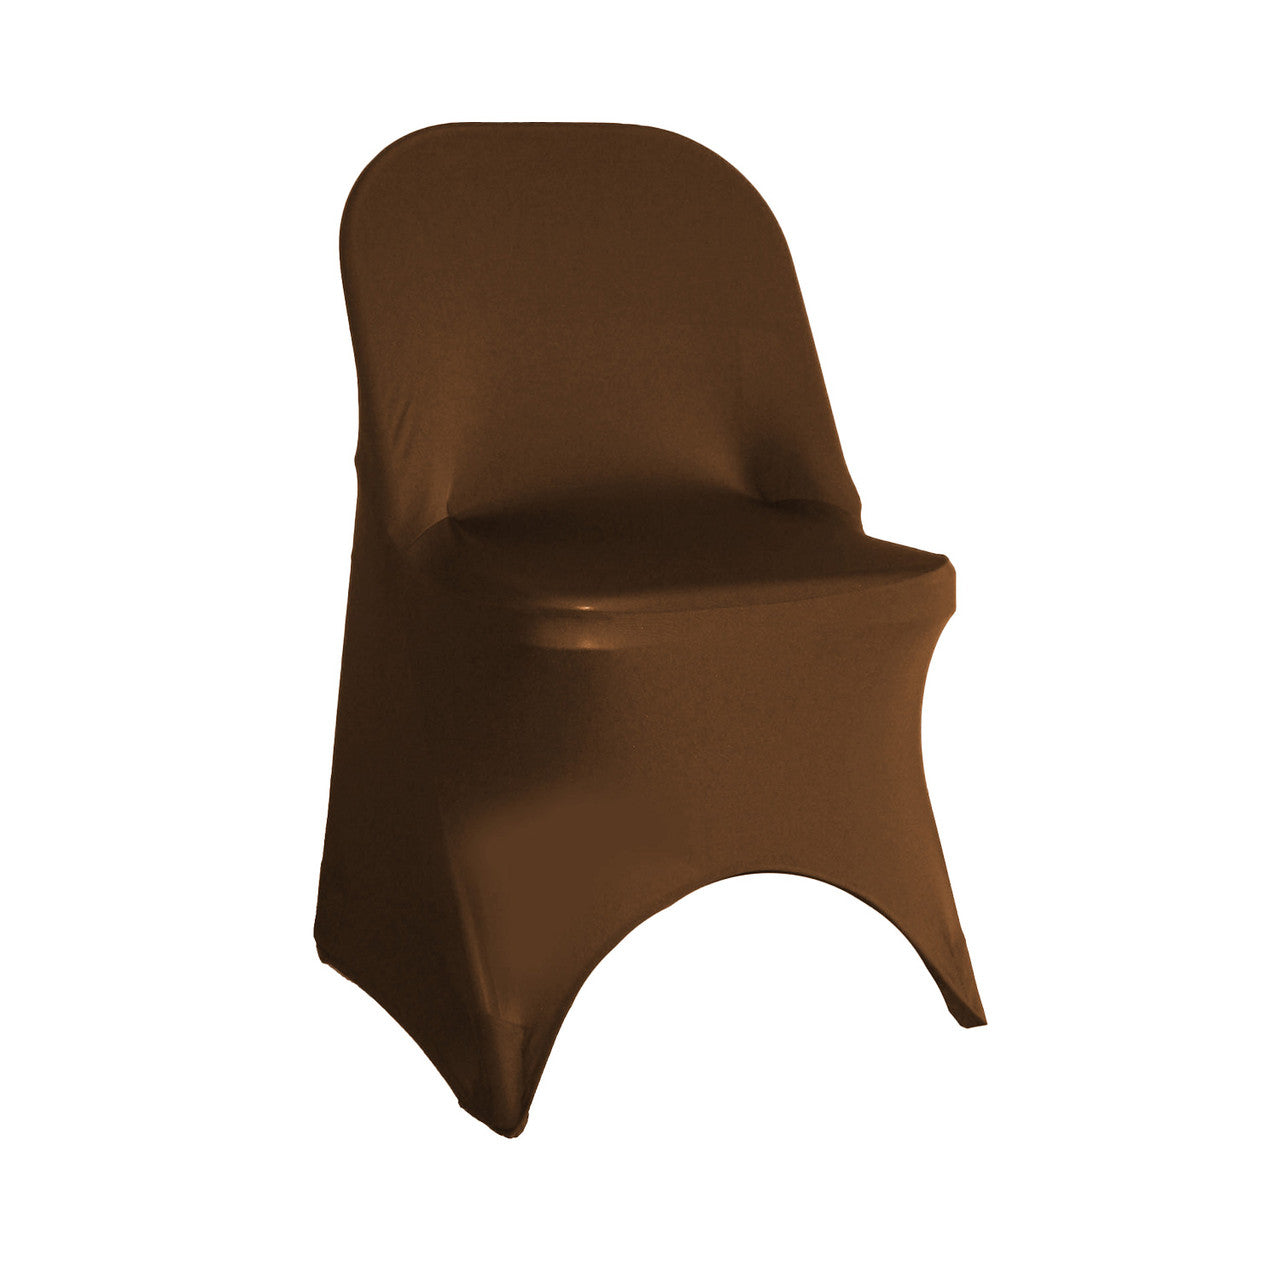 Roughed Spandex Banquet Chair Cover in Brown – Urquid Linen